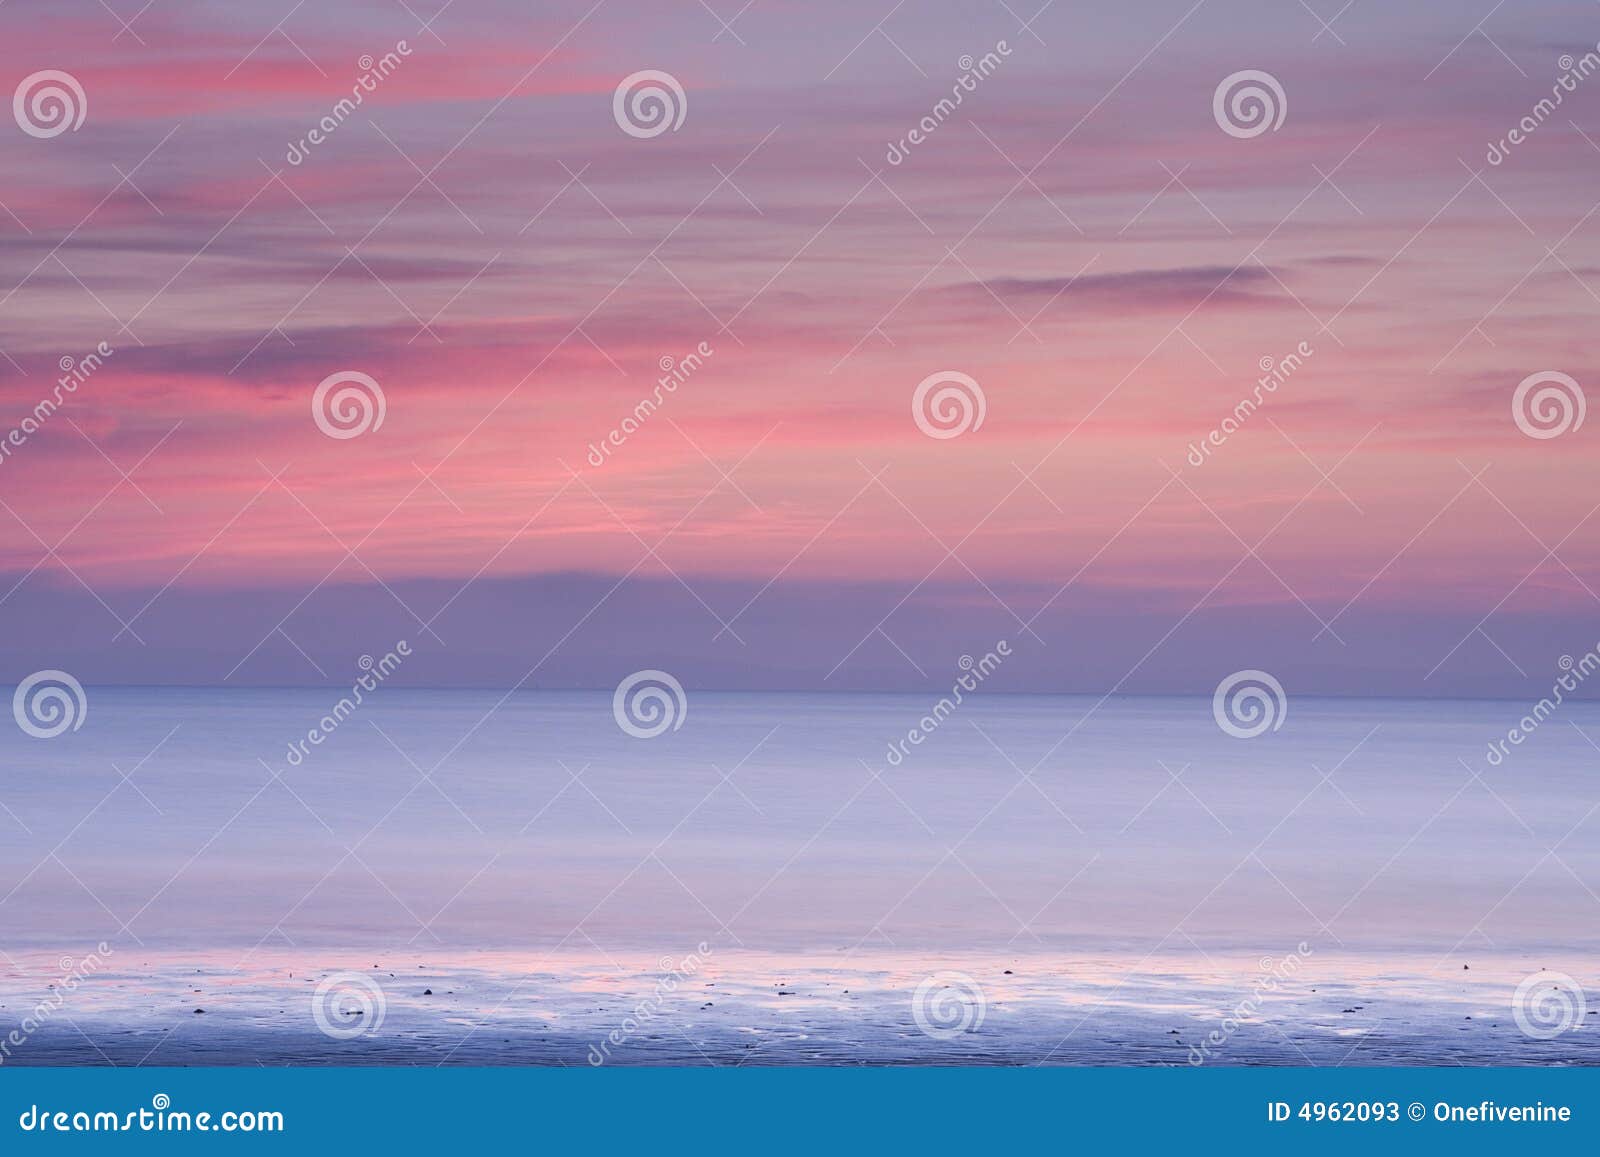 abstract seascape sunset